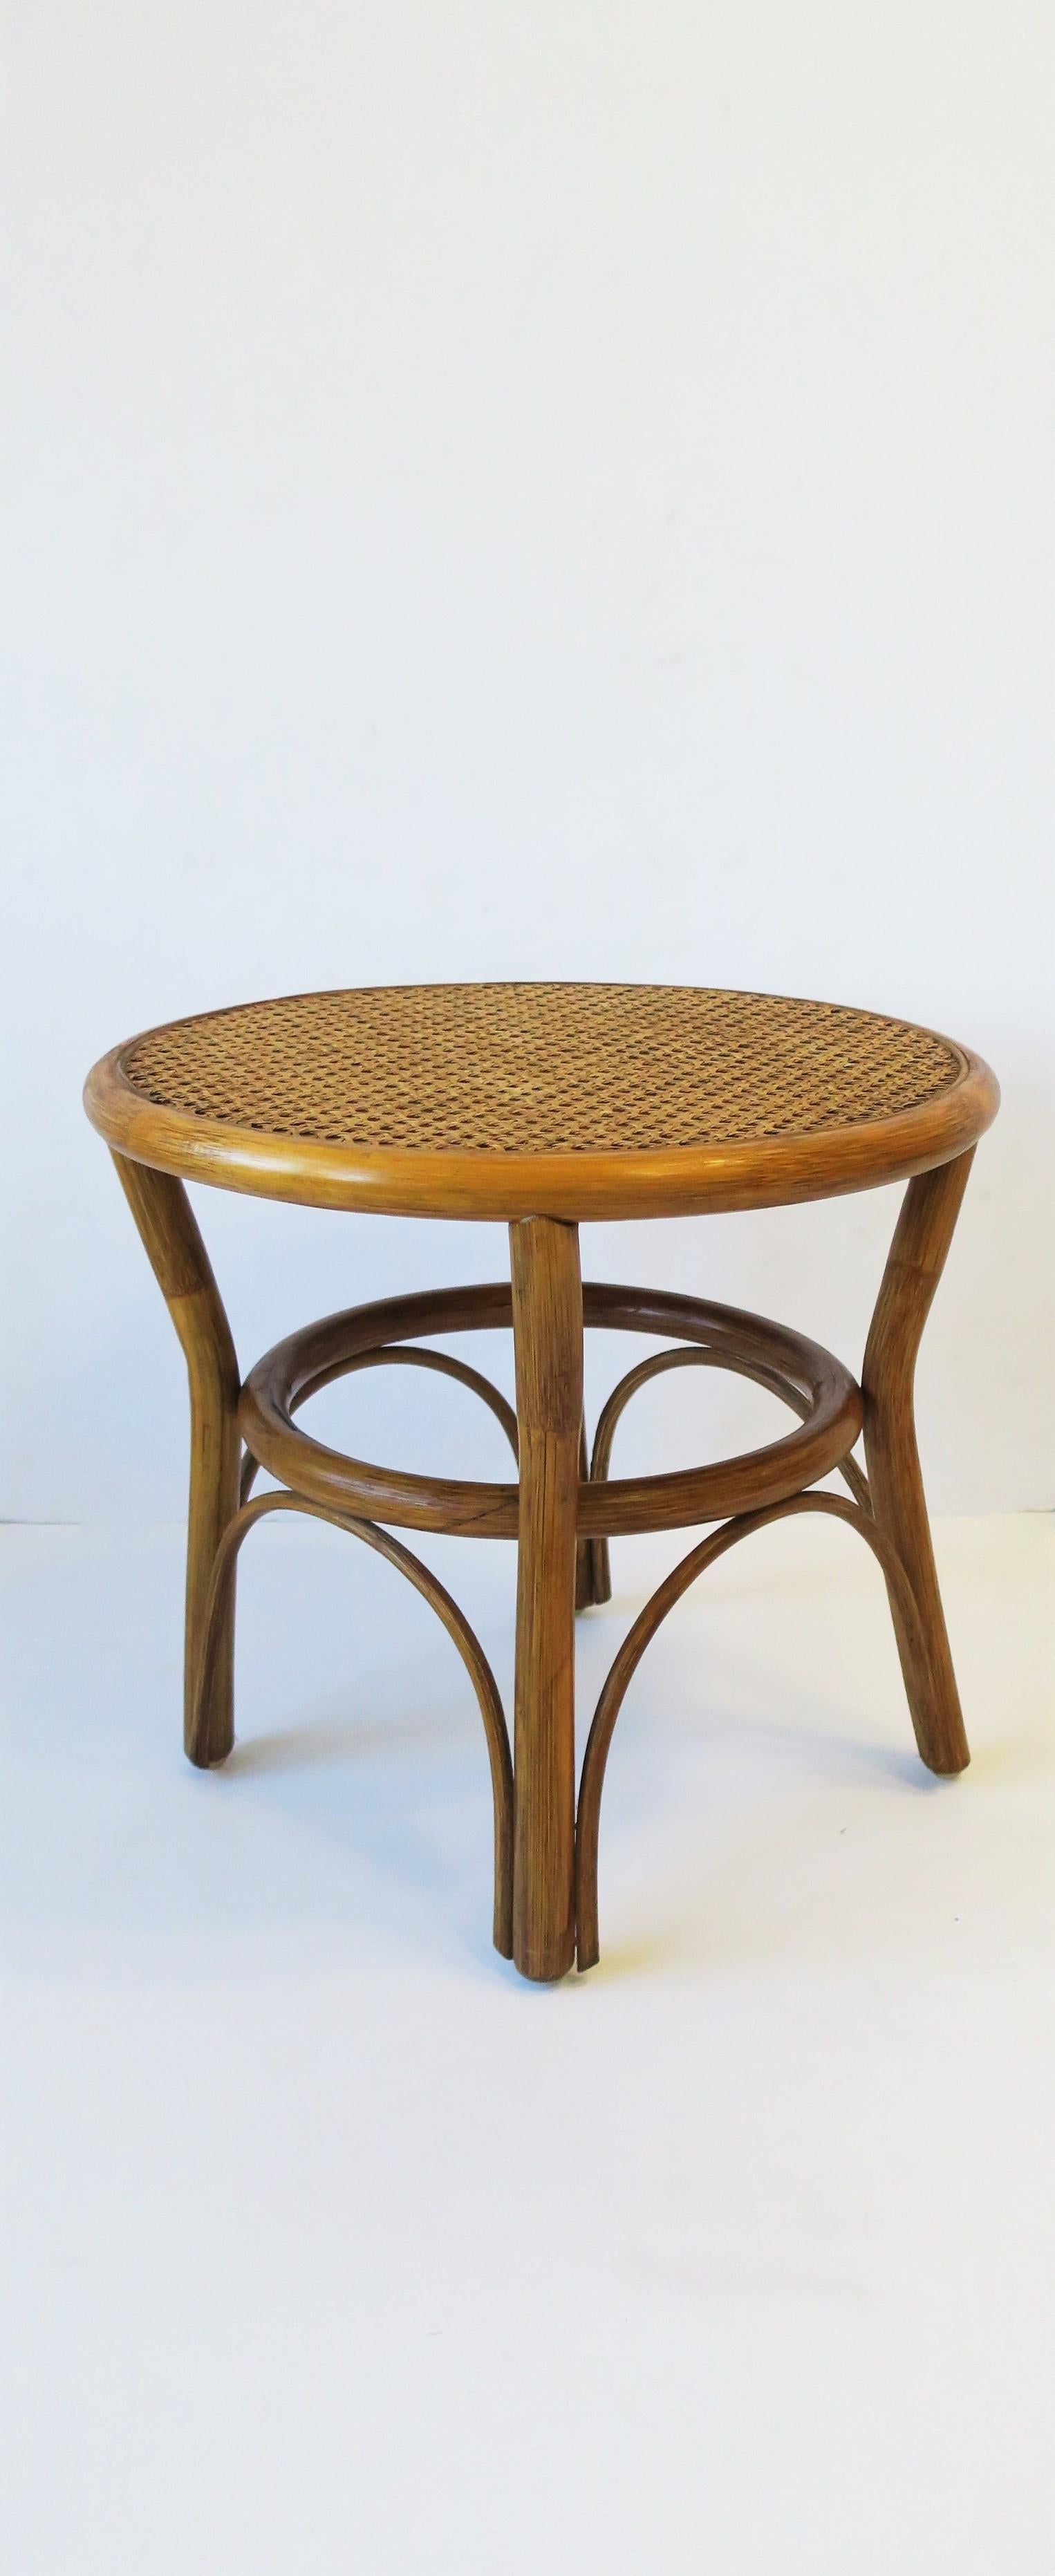 A vintage round wicker cane top and rattan side or end table, circa late-20th century. 
Dimensions: 17.75